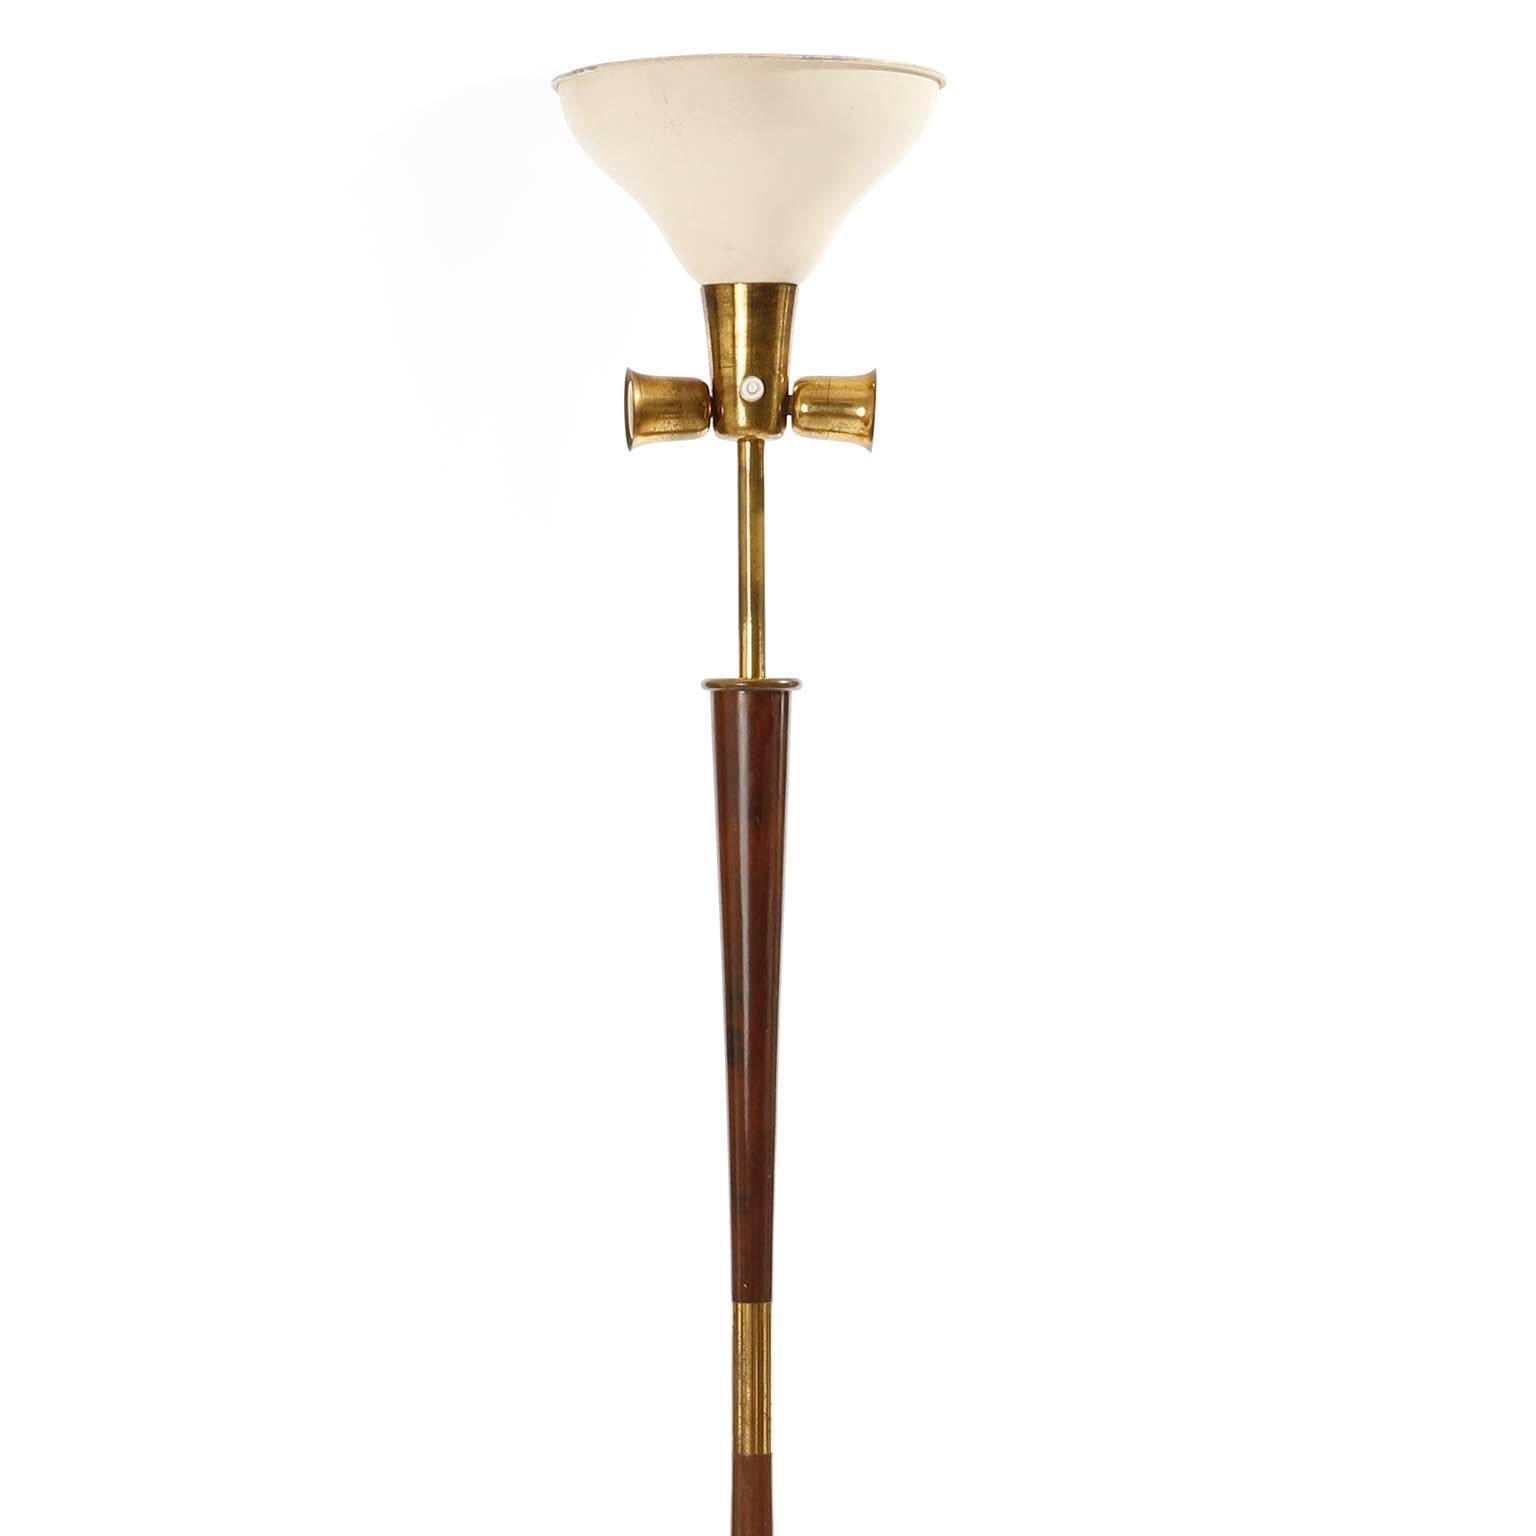 Floor Lamp by Stilnovo, Stained Walnut Brass Marble Base, circa 1946-48 For Sale 1